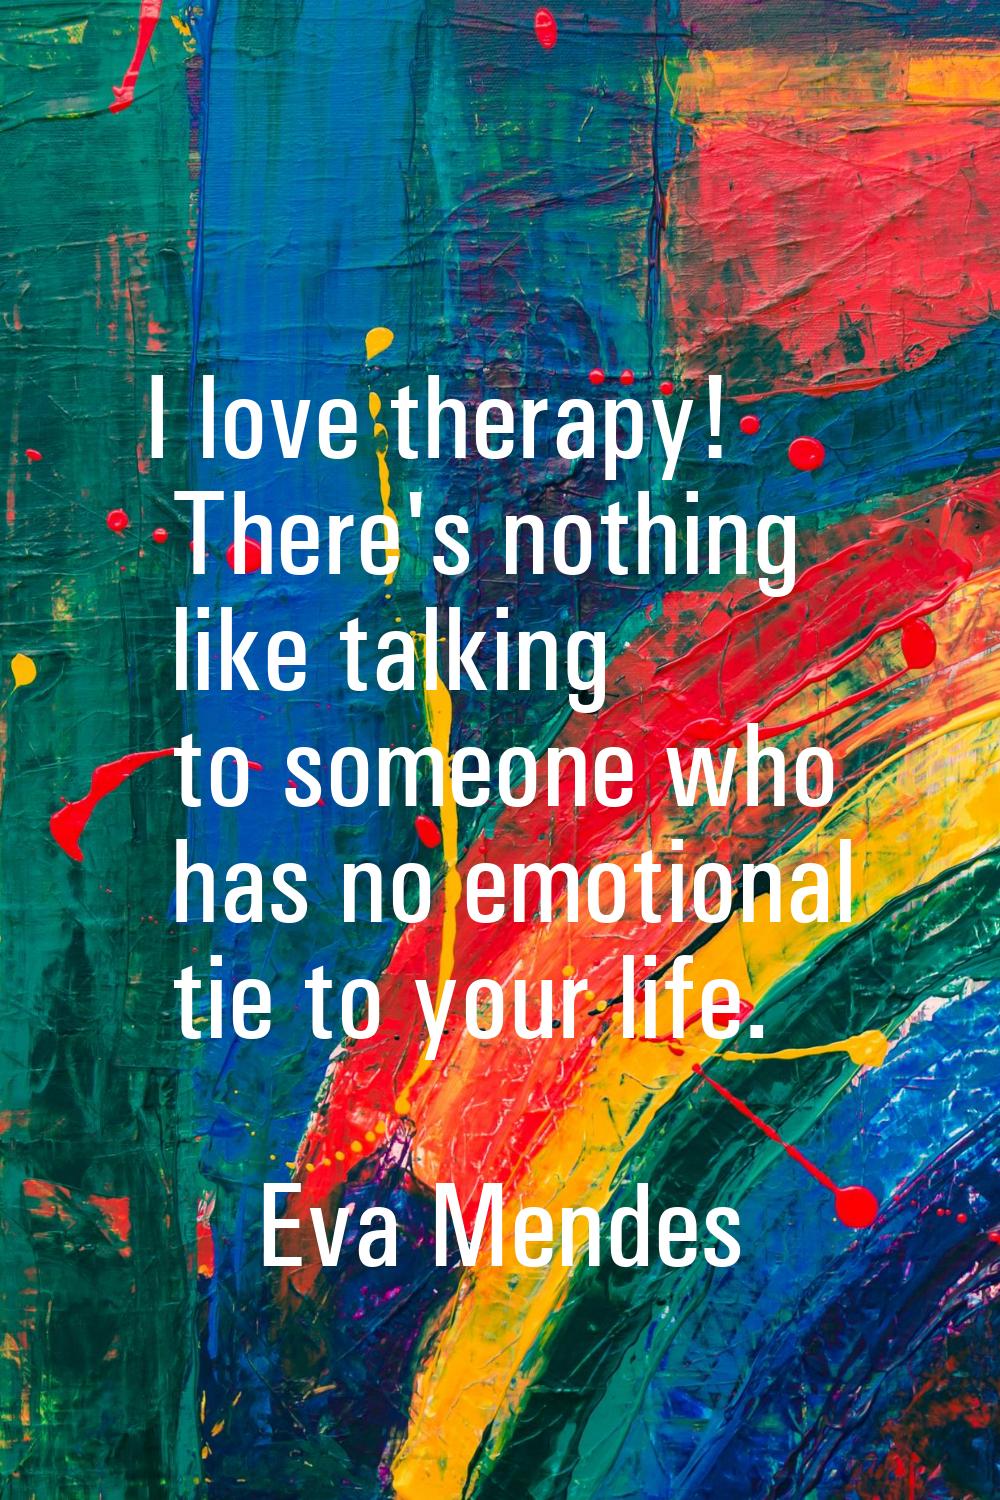 I love therapy! There's nothing like talking to someone who has no emotional tie to your life.